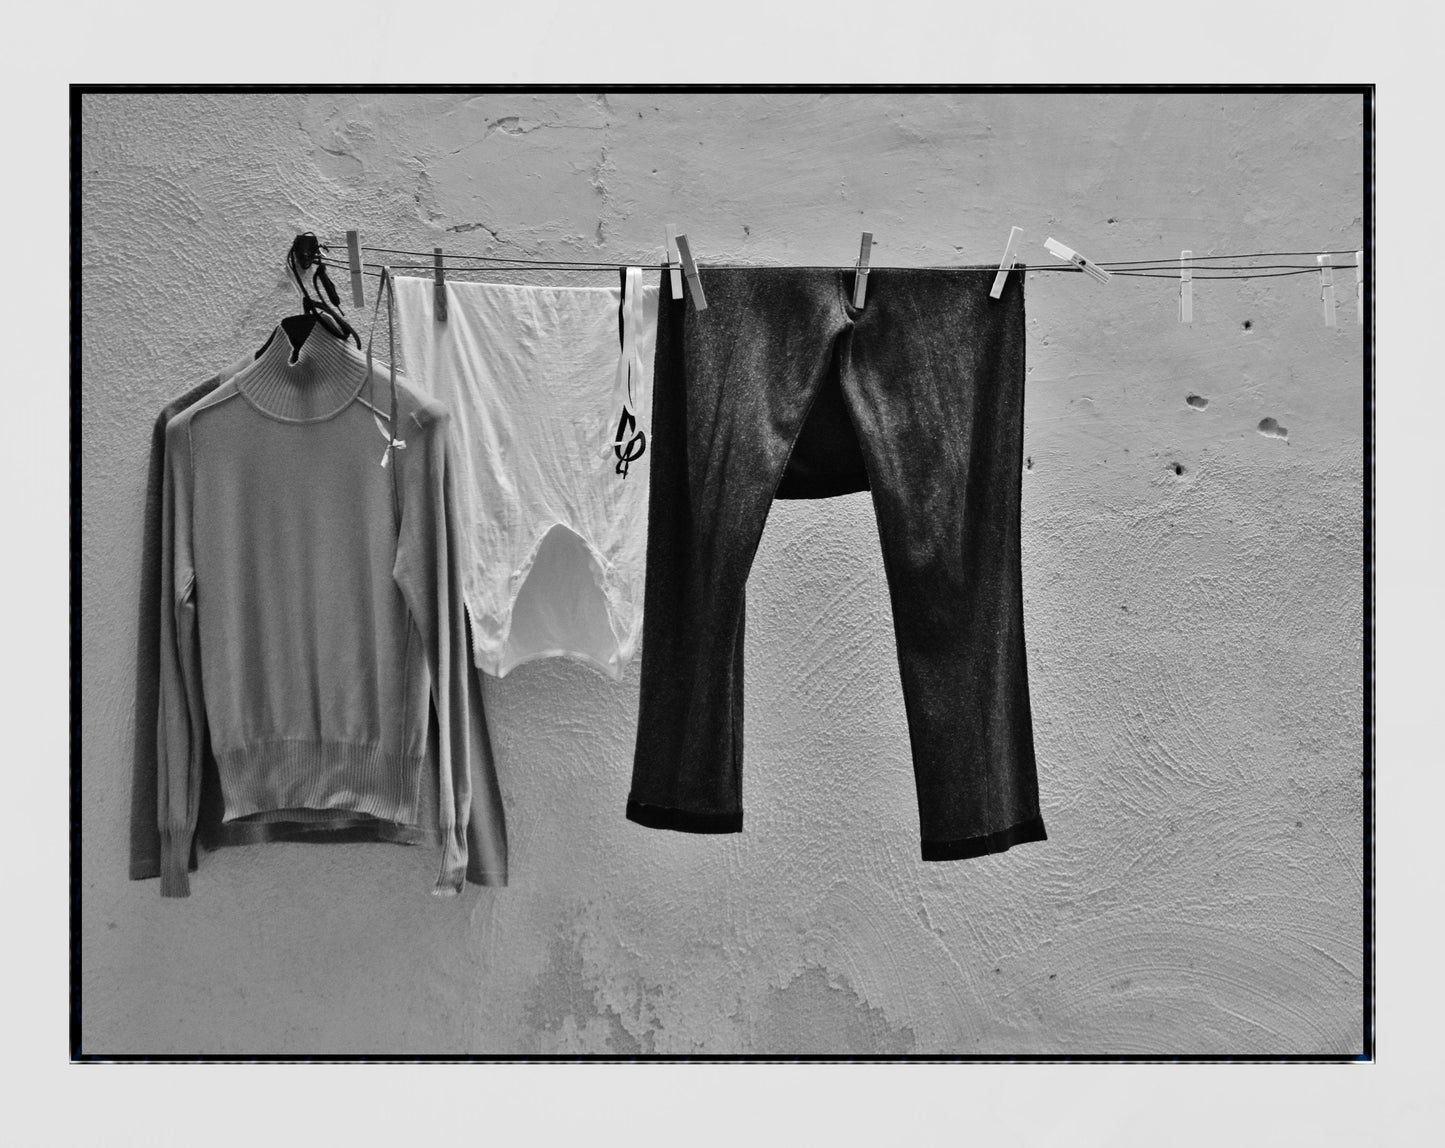 Laundry Photography Naples Italy Black And White Print